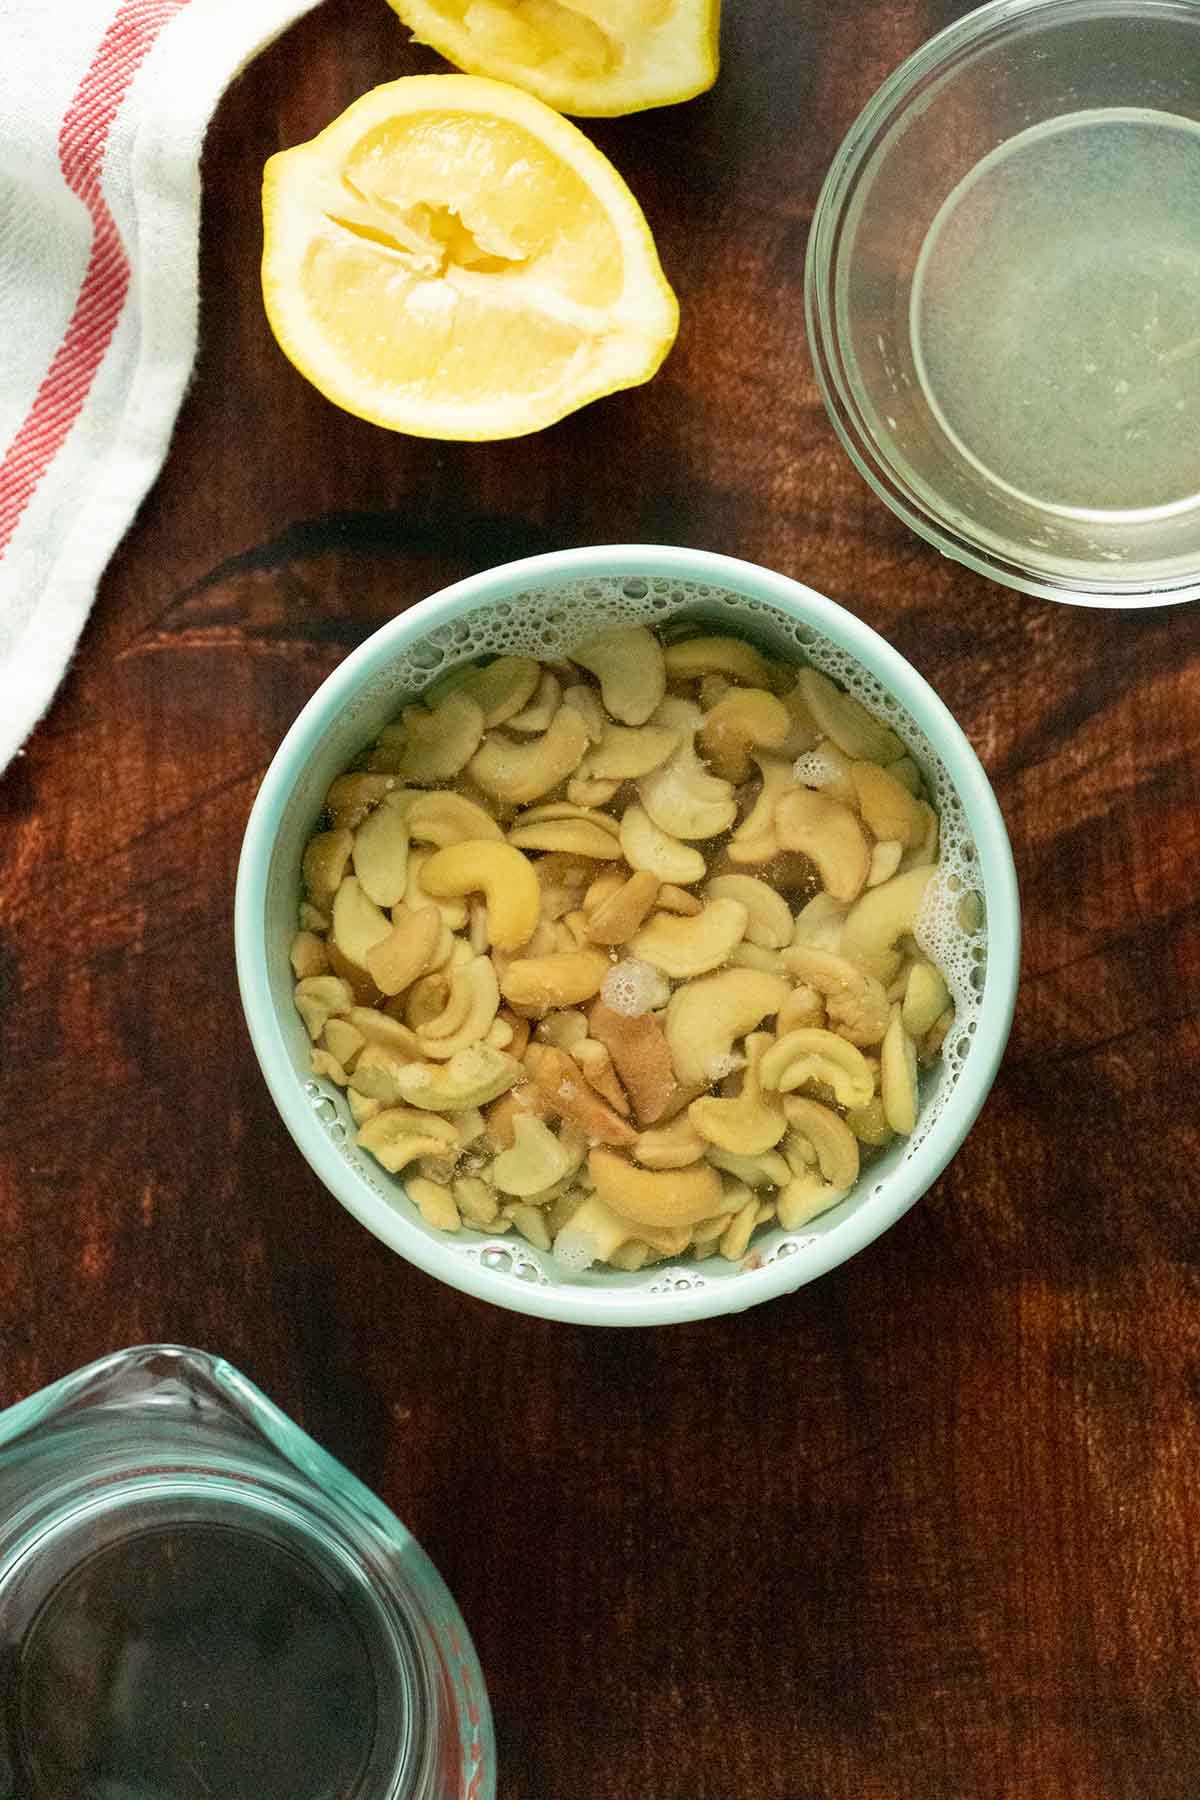 photo of cashews soaking a bowl with lemons, lemon juice, and water on bowls on the table